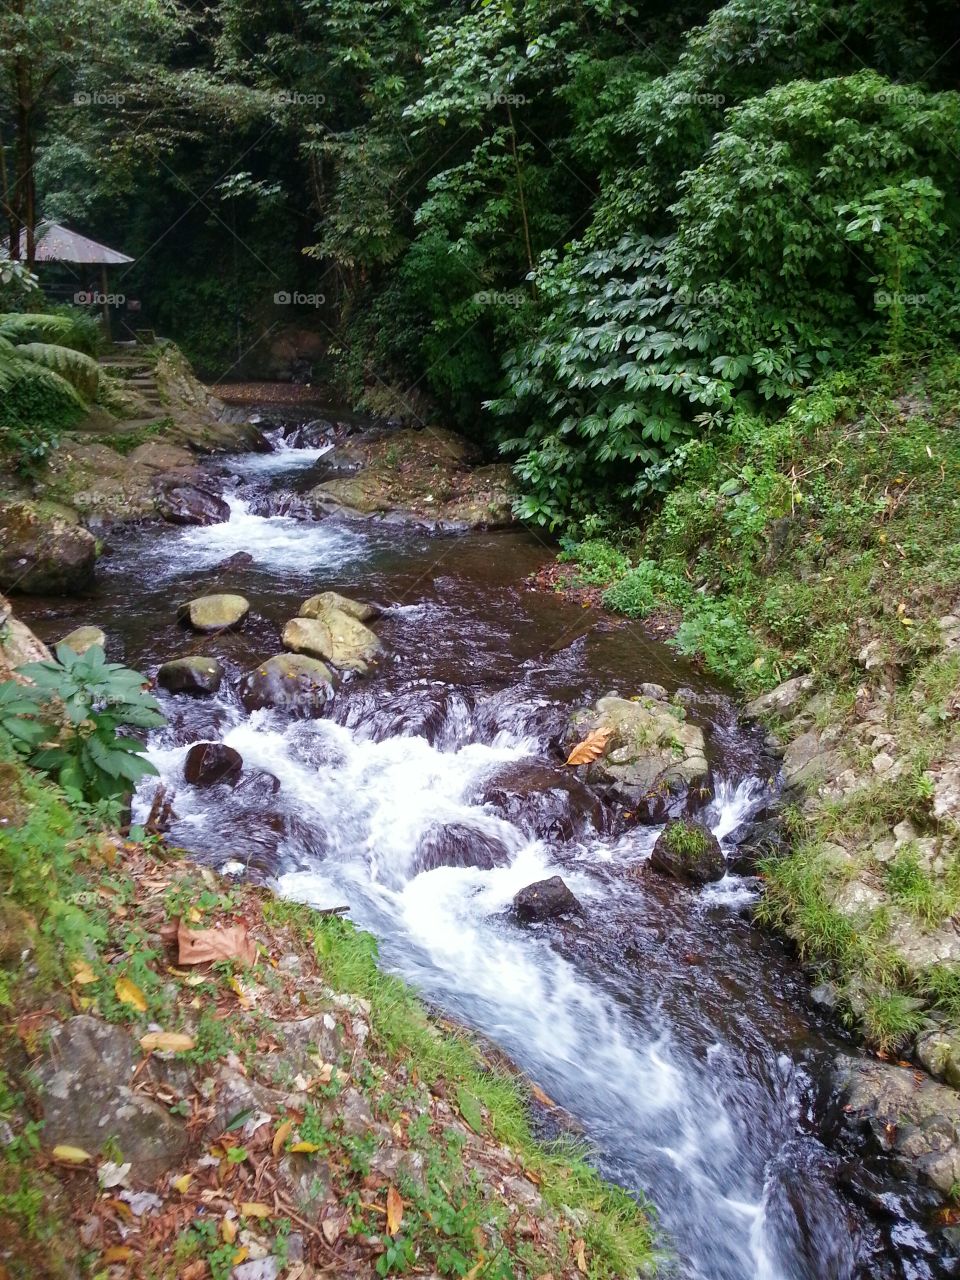 Stream flowing in Bali, Indonesia